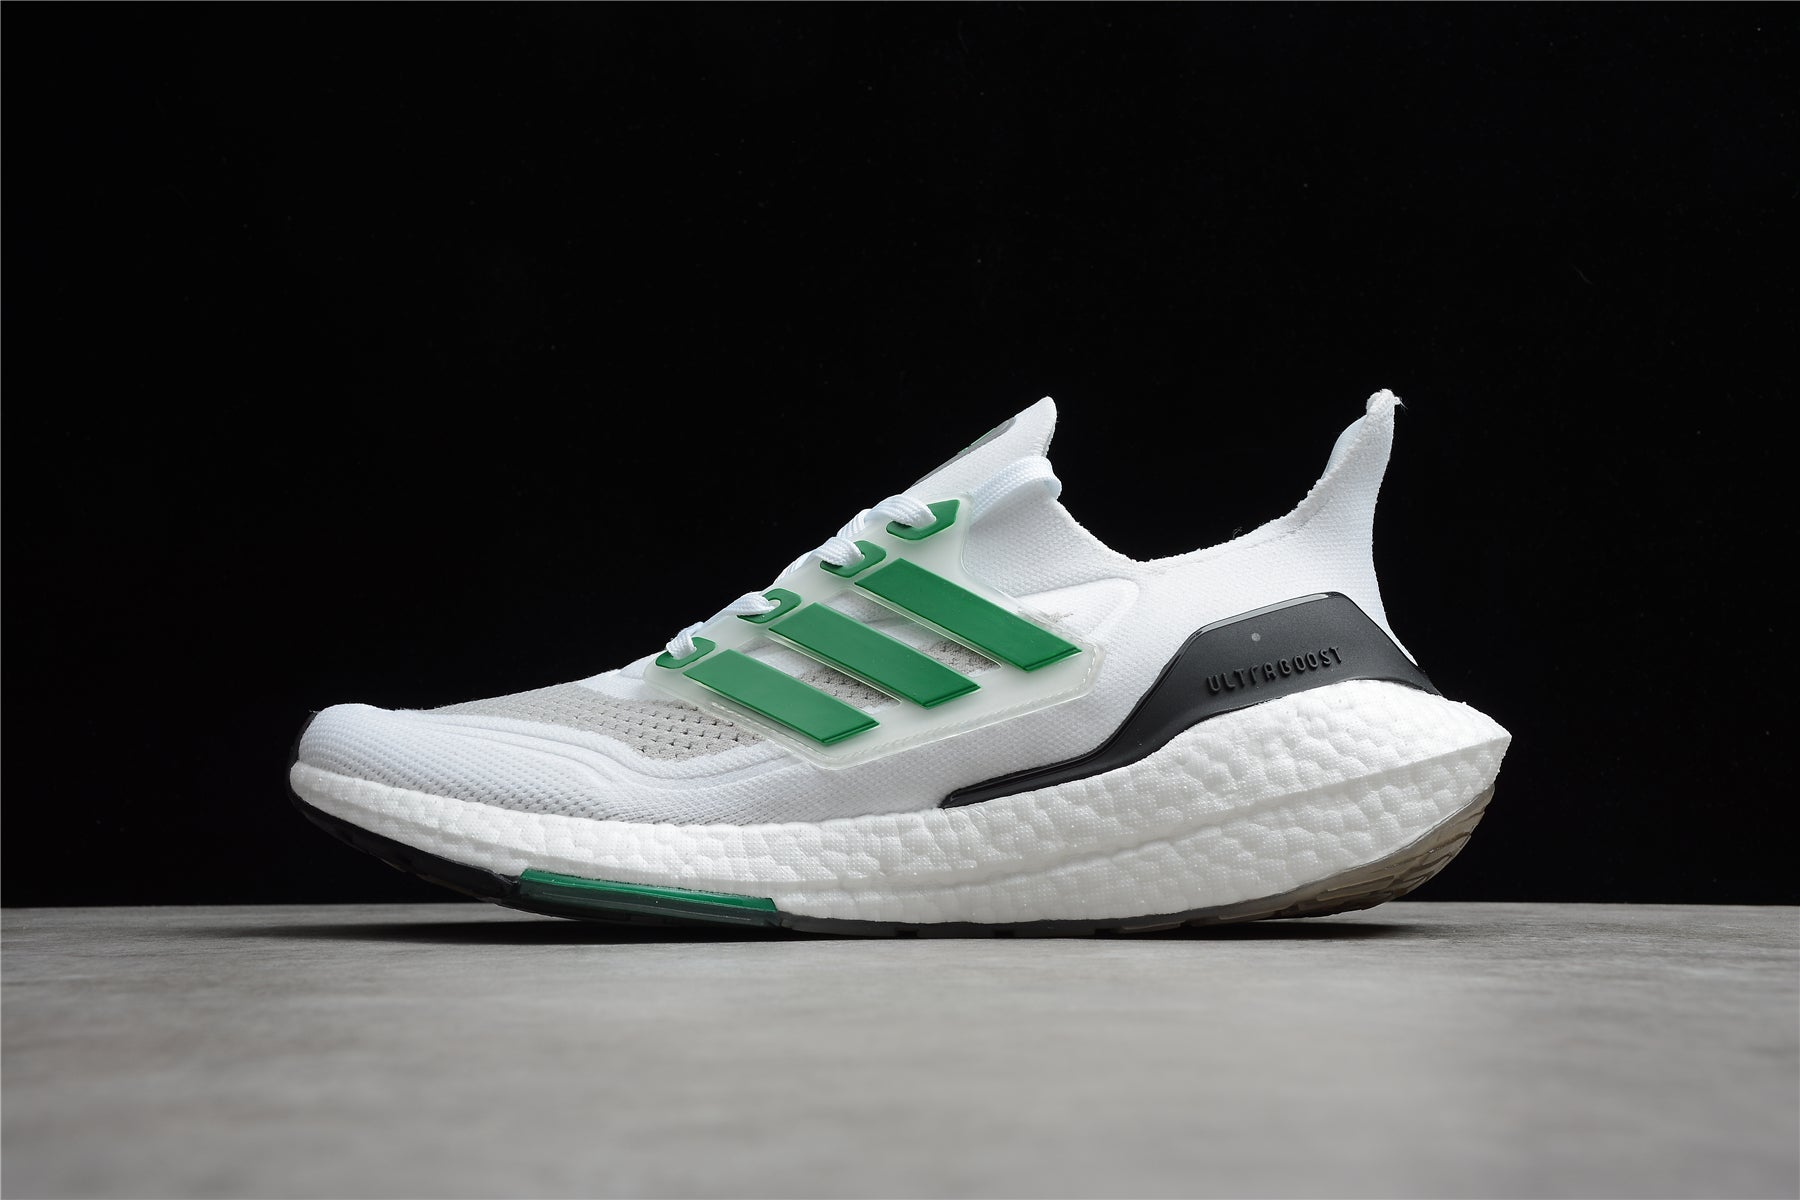 Adidas ultraboost white green shoes